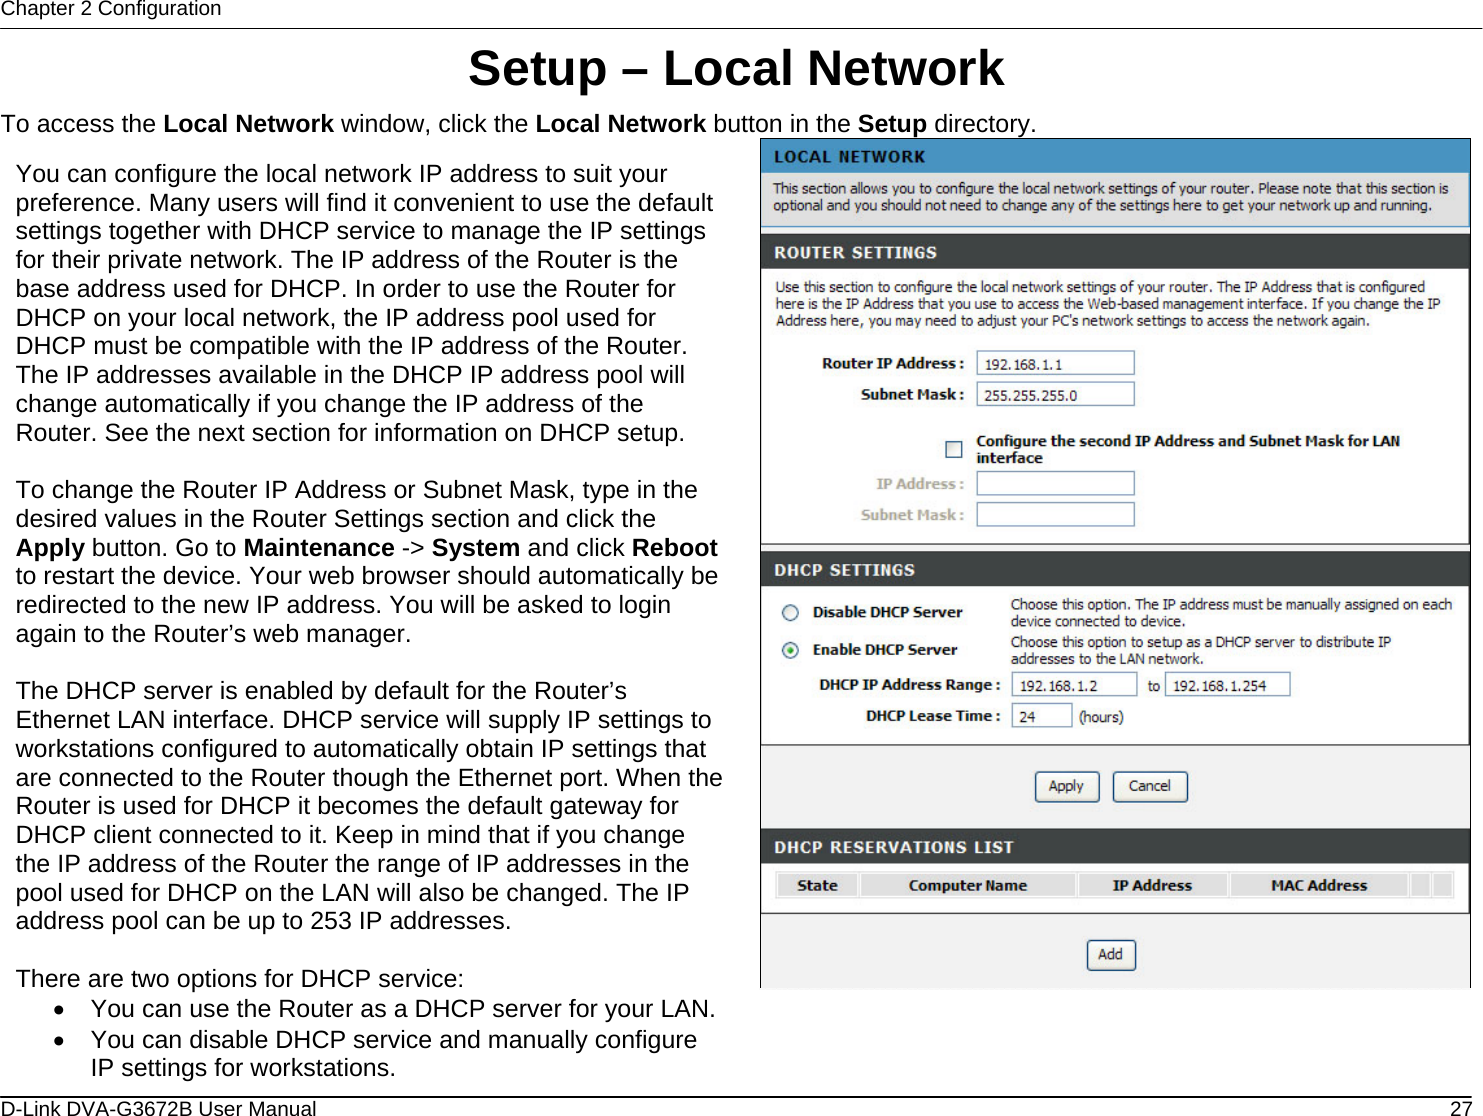 Chapter 2 Configuration Setup – Local Network To access the Local Network window, click the Local Network button in the Setup directory.  You can configure the local network IP address to suit your preference. Many users will find it convenient to use the default settings together with DHCP service to manage the IP settings for their private network. The IP address of the Router is the base address used for DHCP. In order to use the Router for DHCP on your local network, the IP address pool used for DHCP must be compatible with the IP address of the Router. The IP addresses available in the DHCP IP address pool will change automatically if you change the IP address of the Router. See the next section for information on DHCP setup.  To change the Router IP Address or Subnet Mask, type in the desired values in the Router Settings section and click the Apply button. Go to Maintenance -&gt; System and click Rebootto restart the device. Your web browser should automatically be redirected to the new IP address. You will be asked to login again to the Router’s web manager.  The DHCP server is enabled by default for the Router’s Ethernet LAN interface. DHCP service will supply IP settings to workstations configured to automatically obtain IP settings that are connected to the Router though the Ethernet port. When the Router is used for DHCP it becomes the default gateway for DHCP client connected to it. Keep in mind that if you change the IP address of the Router the range of IP addresses in the pool used for DHCP on the LAN will also be changed. The IP address pool can be up to 253 IP addresses.  There are two options for DHCP service: •  You can use the Router as a DHCP server for your LAN.•  You can disable DHCP service and manually configure IP settings for workstations.   D-Link DVA-G3672B User Manual  27